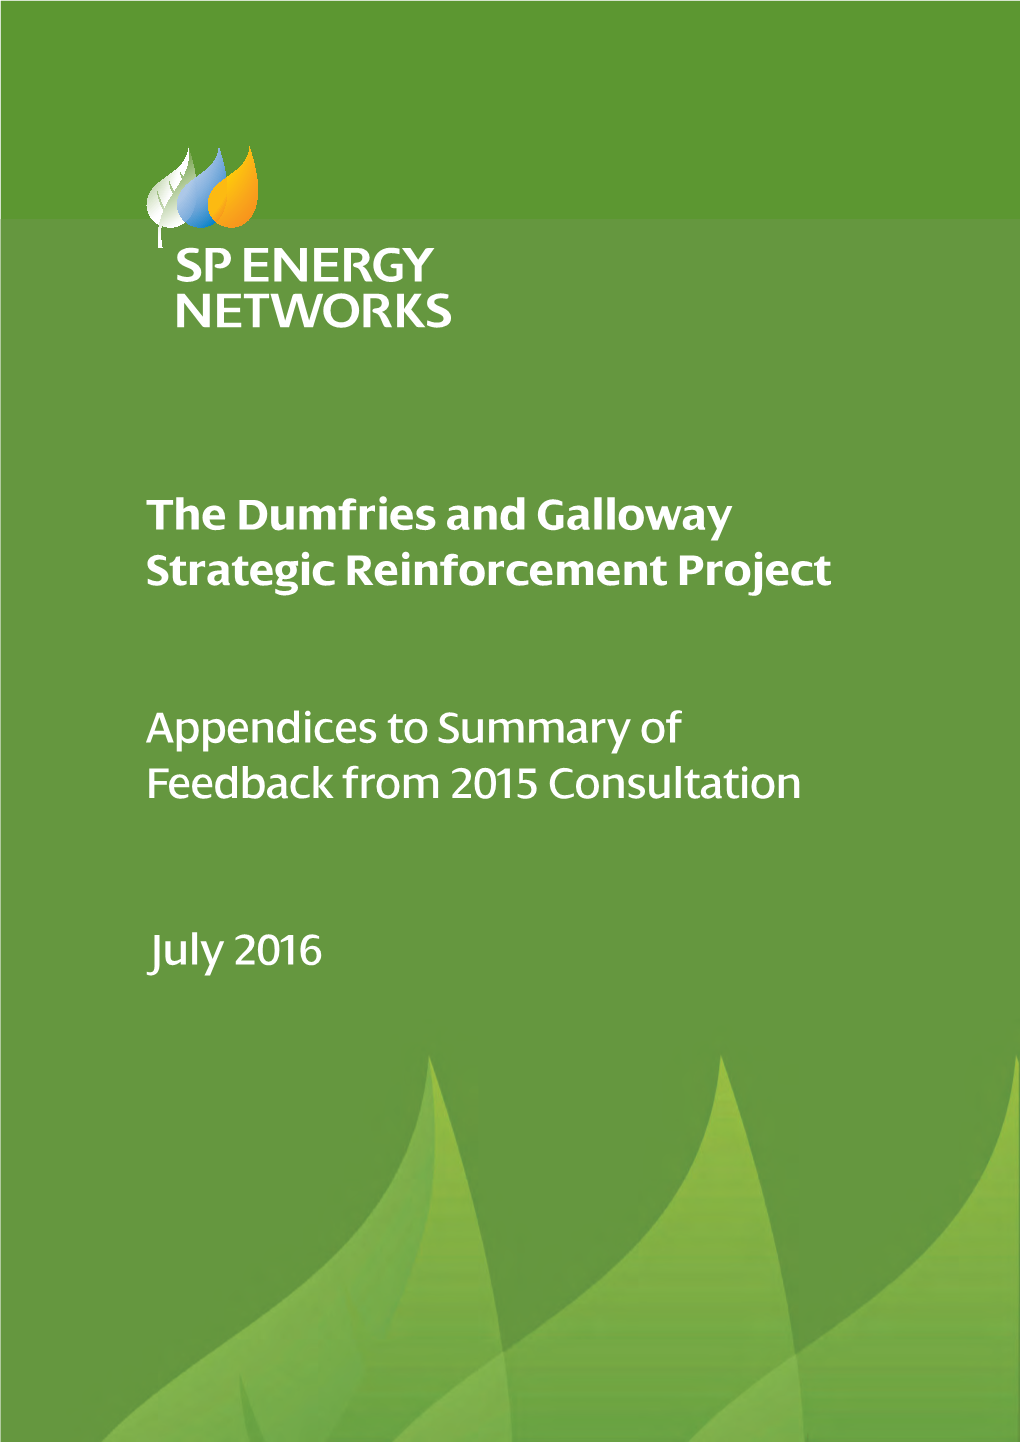 Appendices to Summary of Feedback from 2015 Consultation